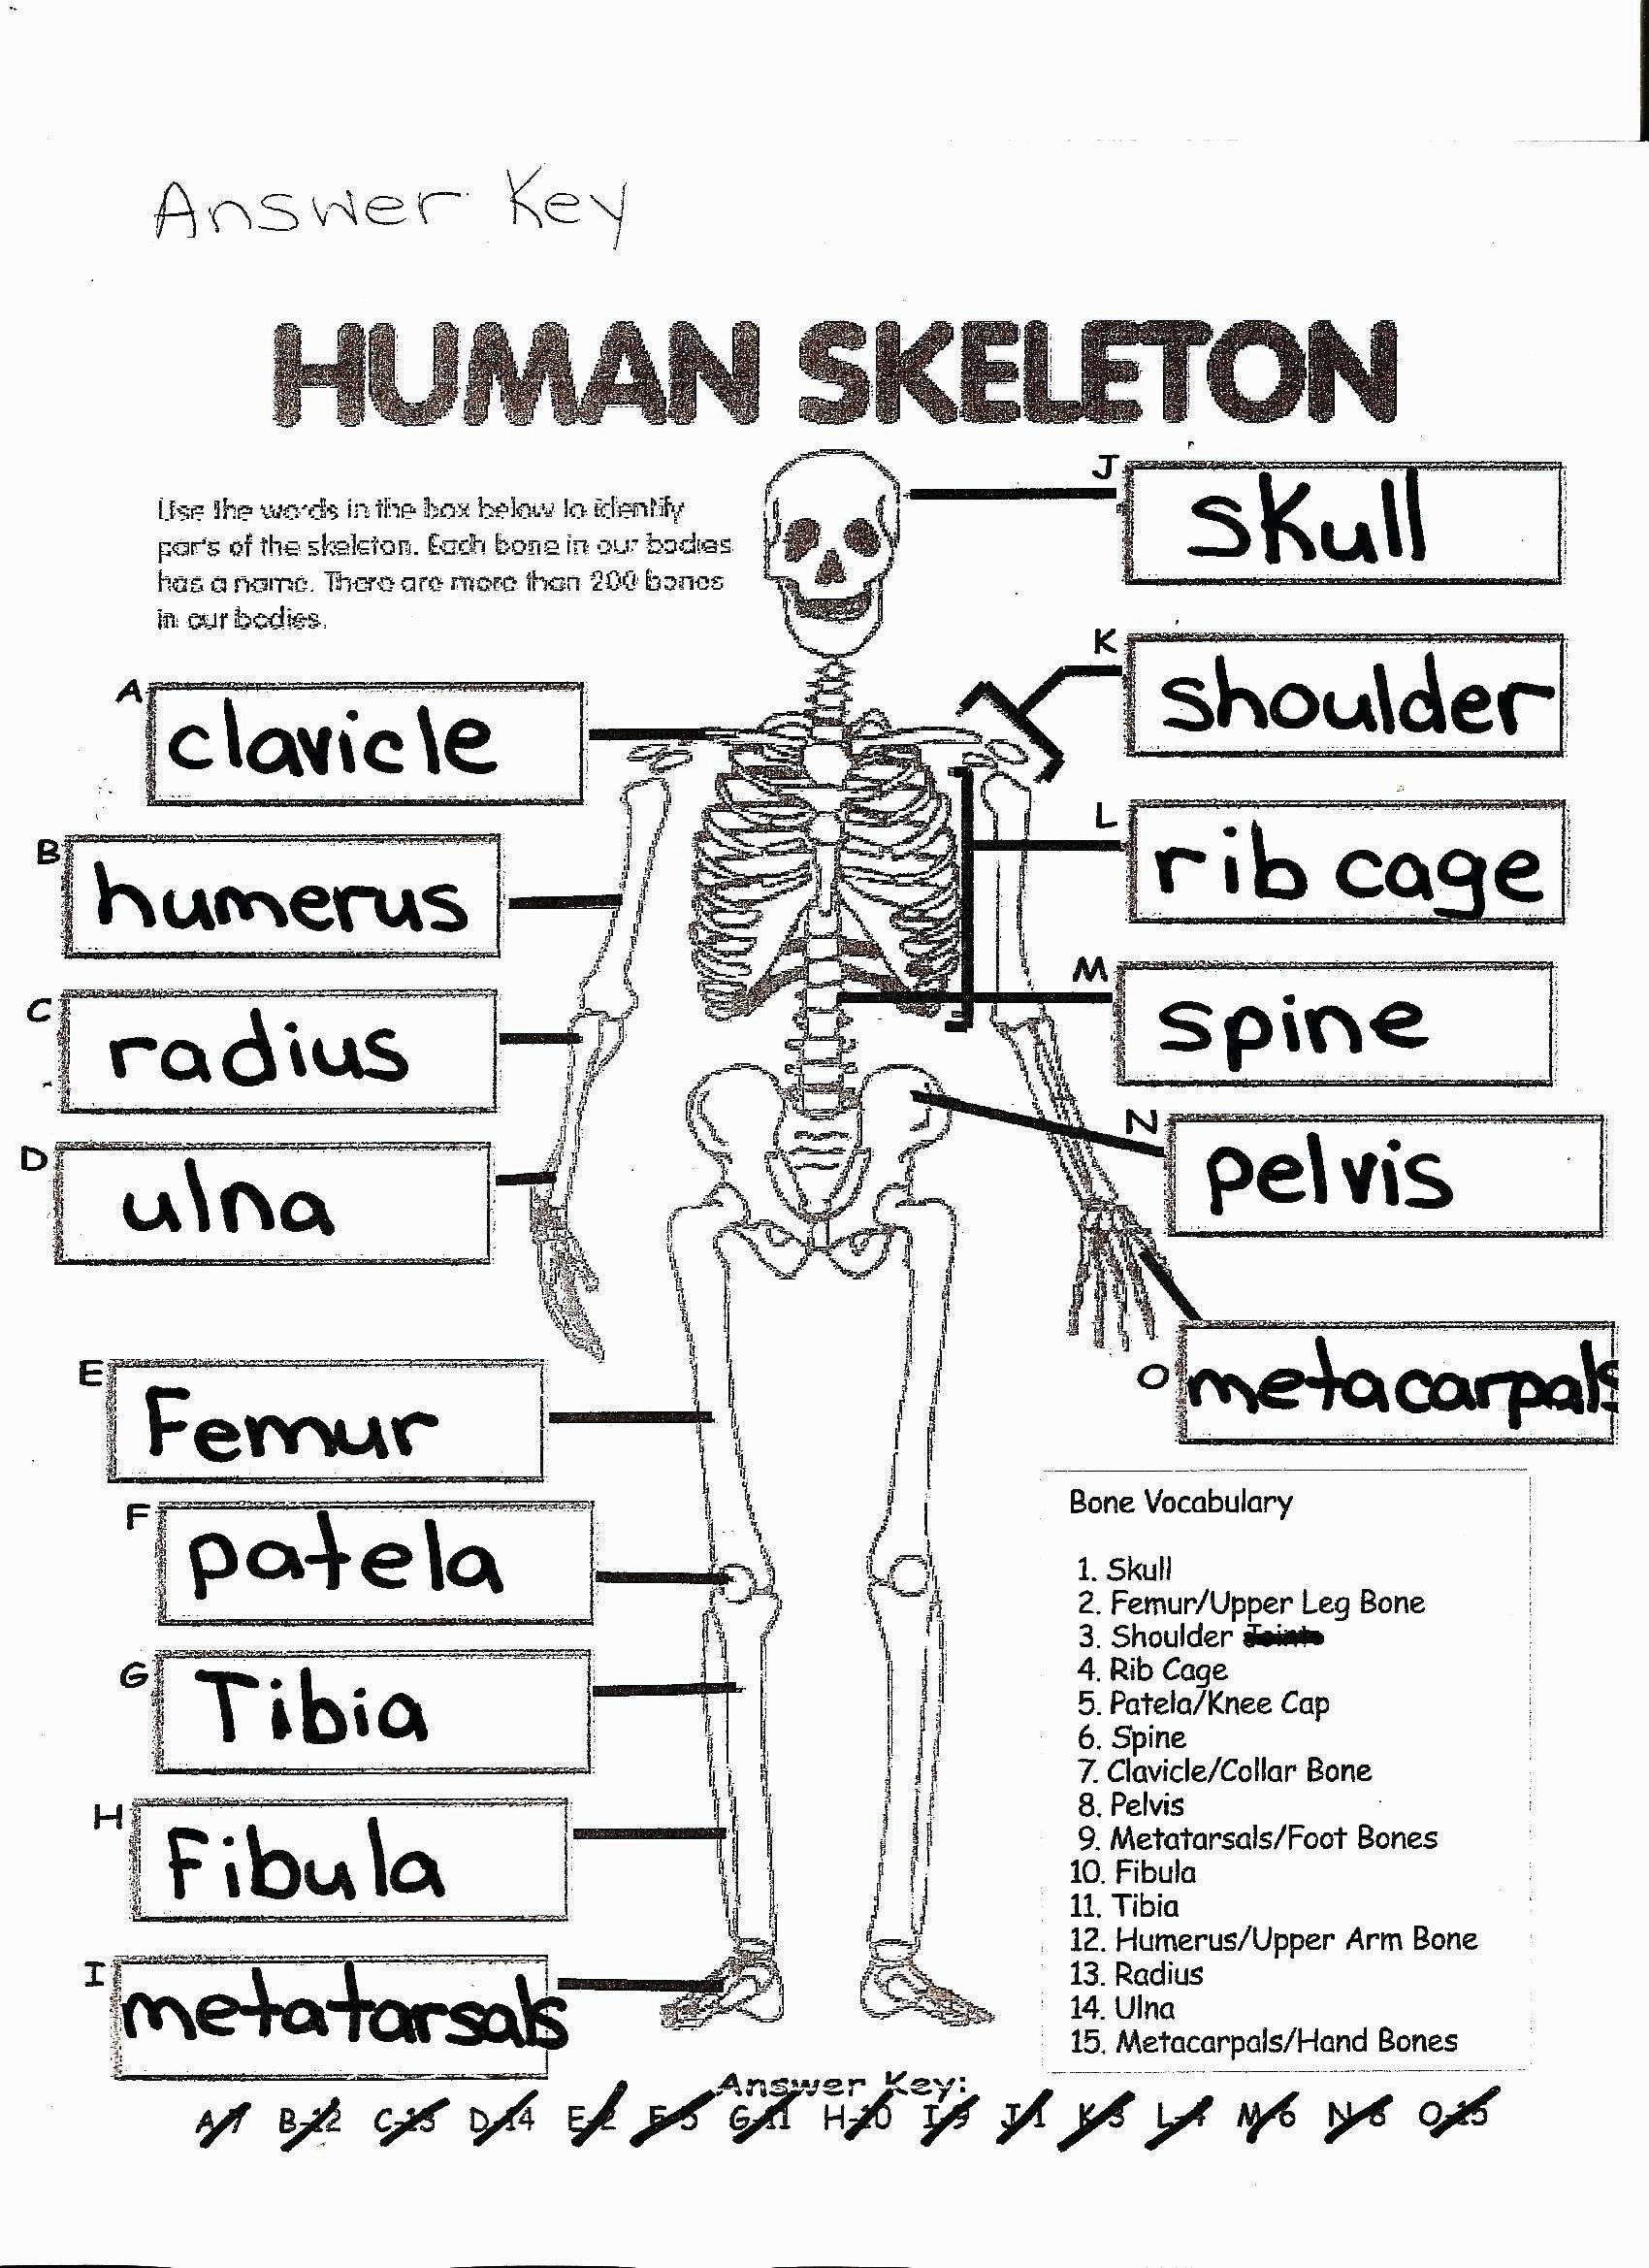 Anatomy Coloring Pages Coloring Page Free Printable Human Anatomy Coloring  Pages - albanysinsanity.com | Skeletal system worksheet, Human body  worksheets, Skeletal system anatomy